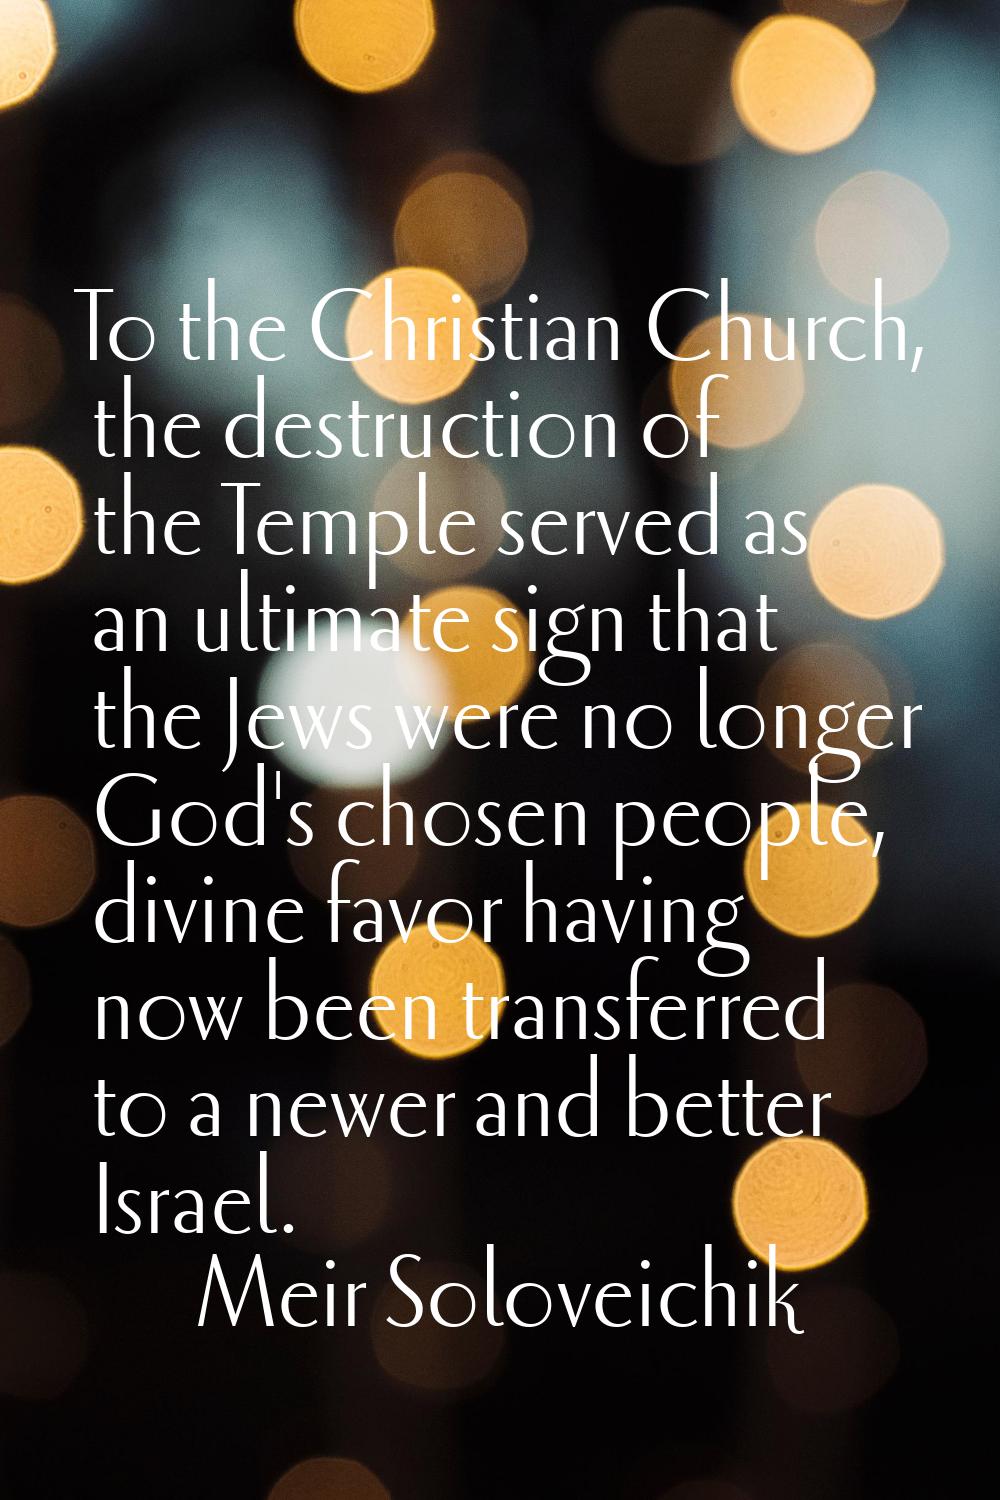 To the Christian Church, the destruction of the Temple served as an ultimate sign that the Jews wer